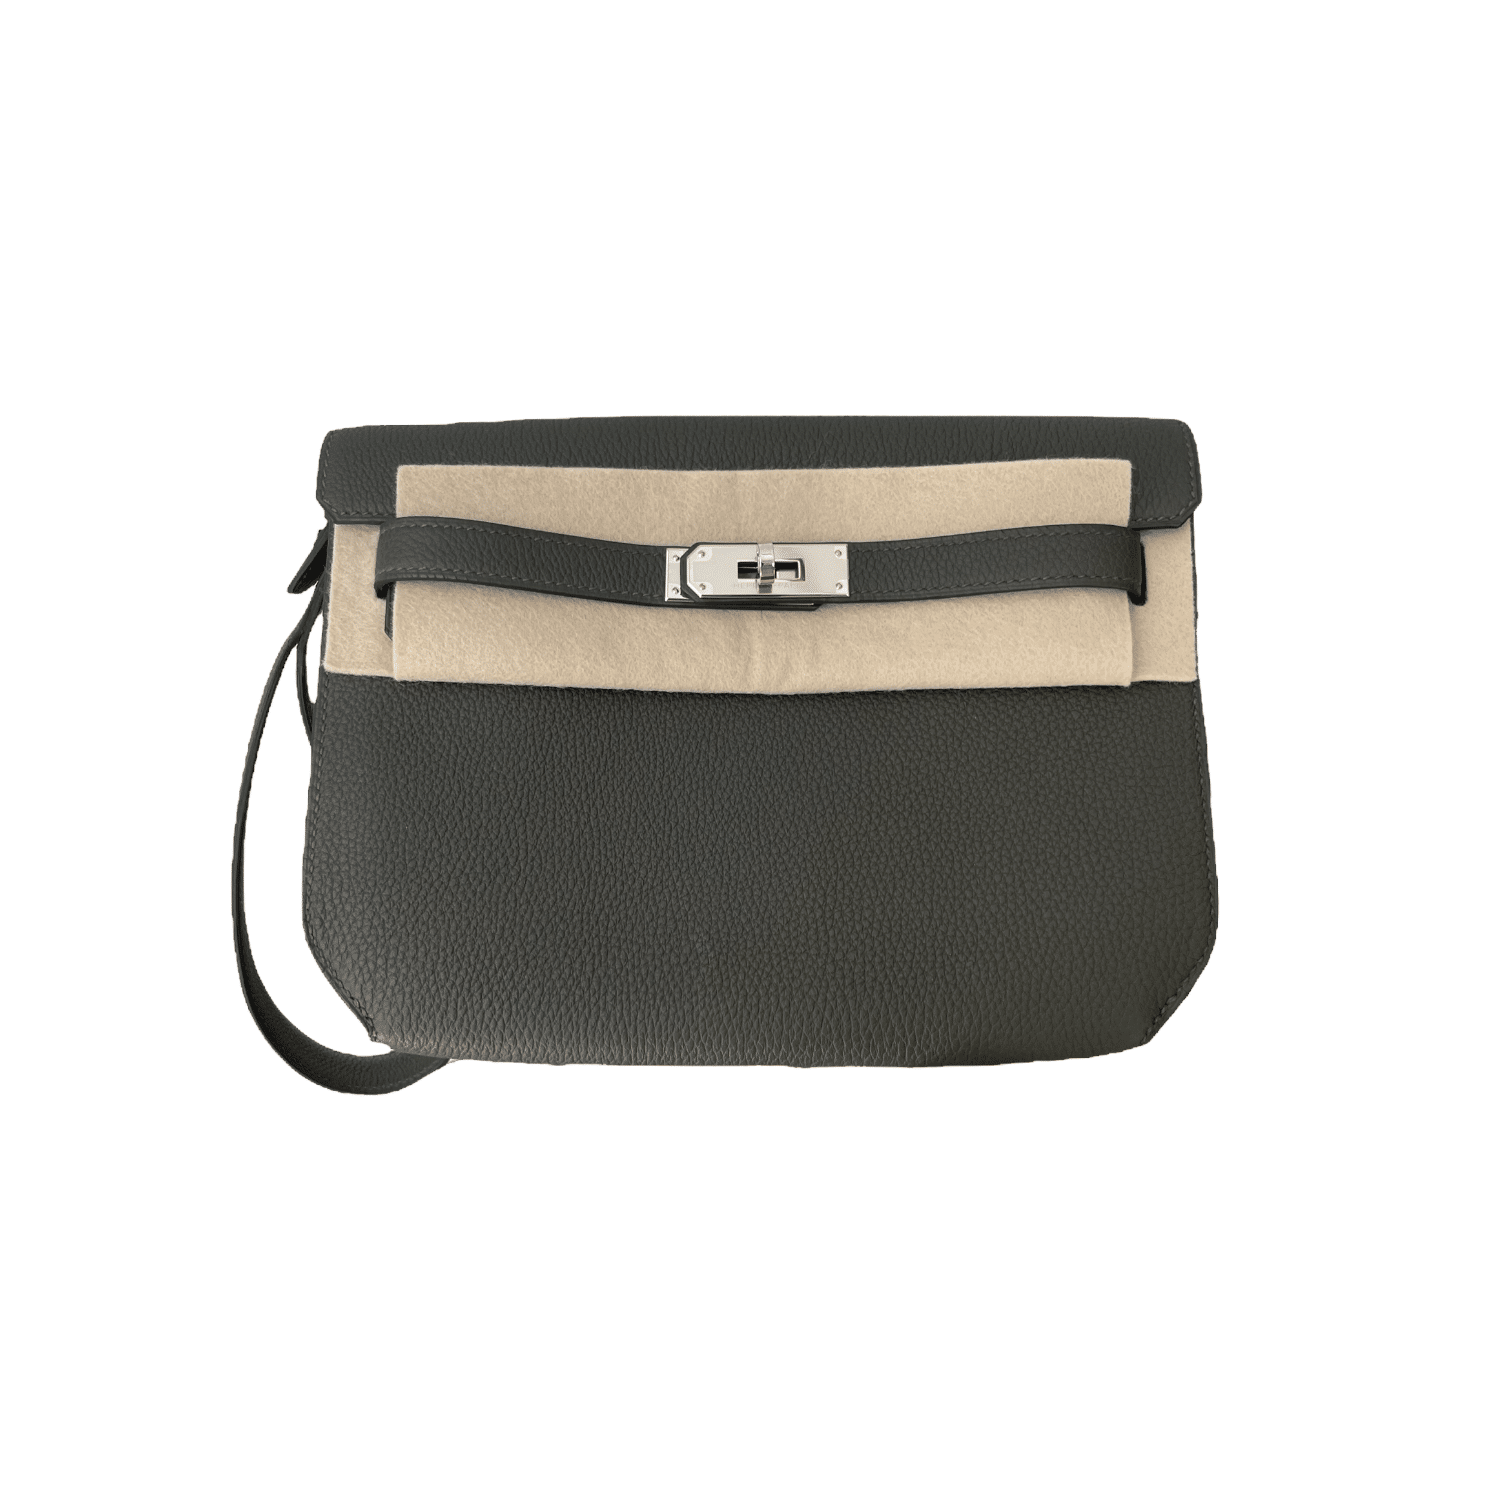 kelly depeches 25 pouch price